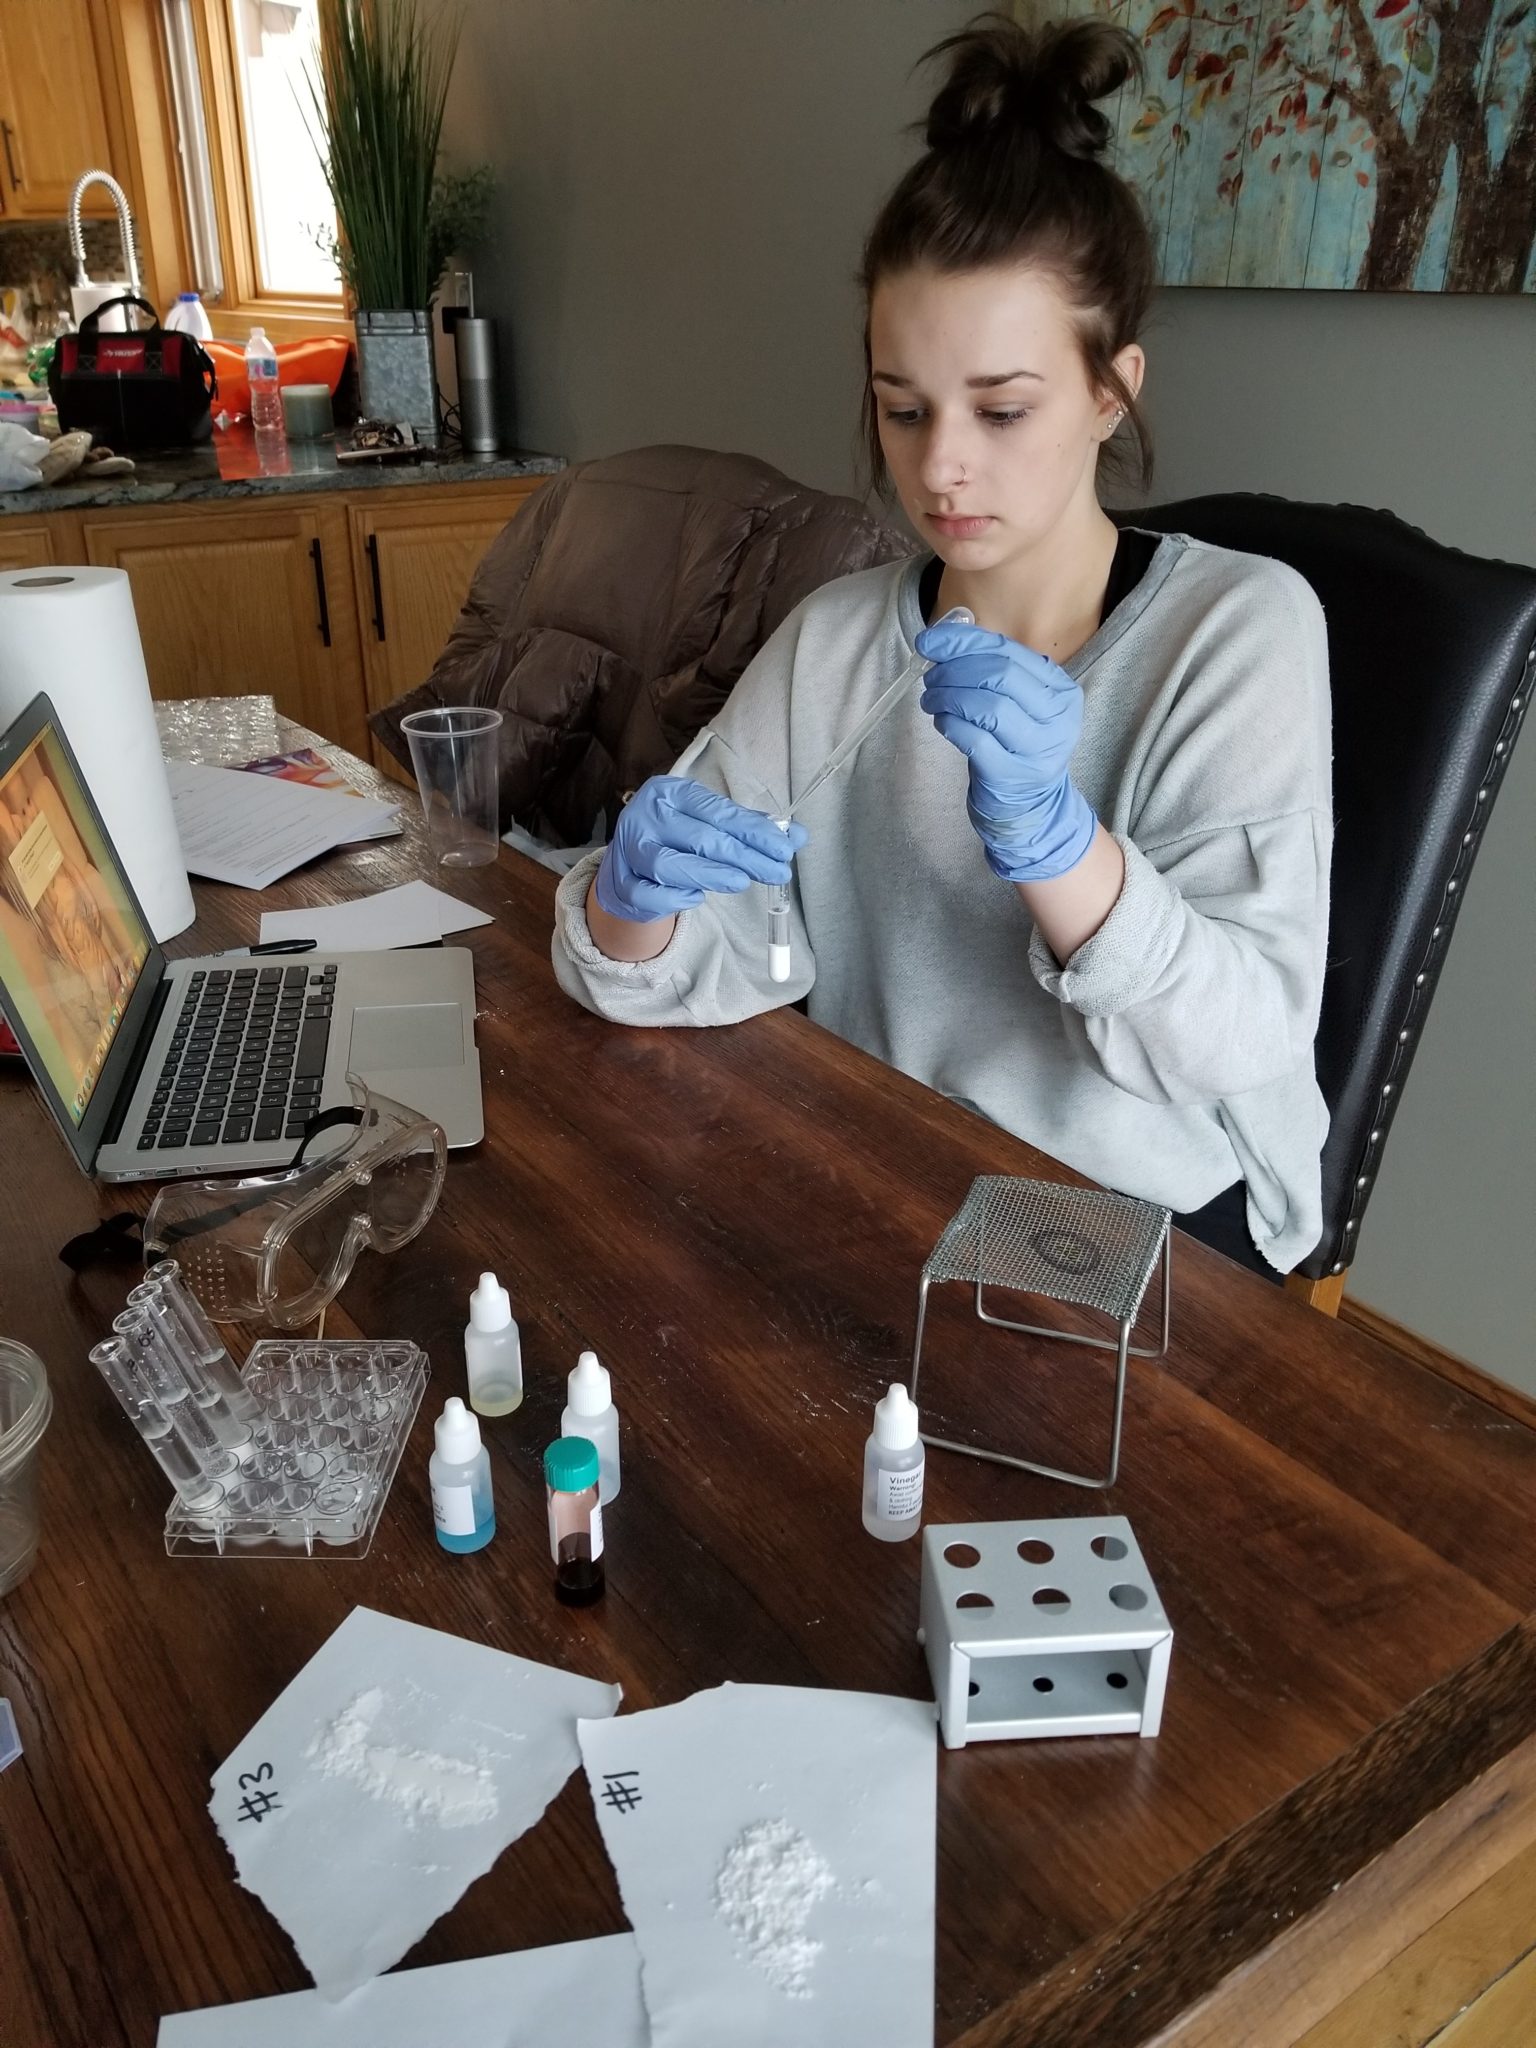 Student works with at-home chemistry lab kit.